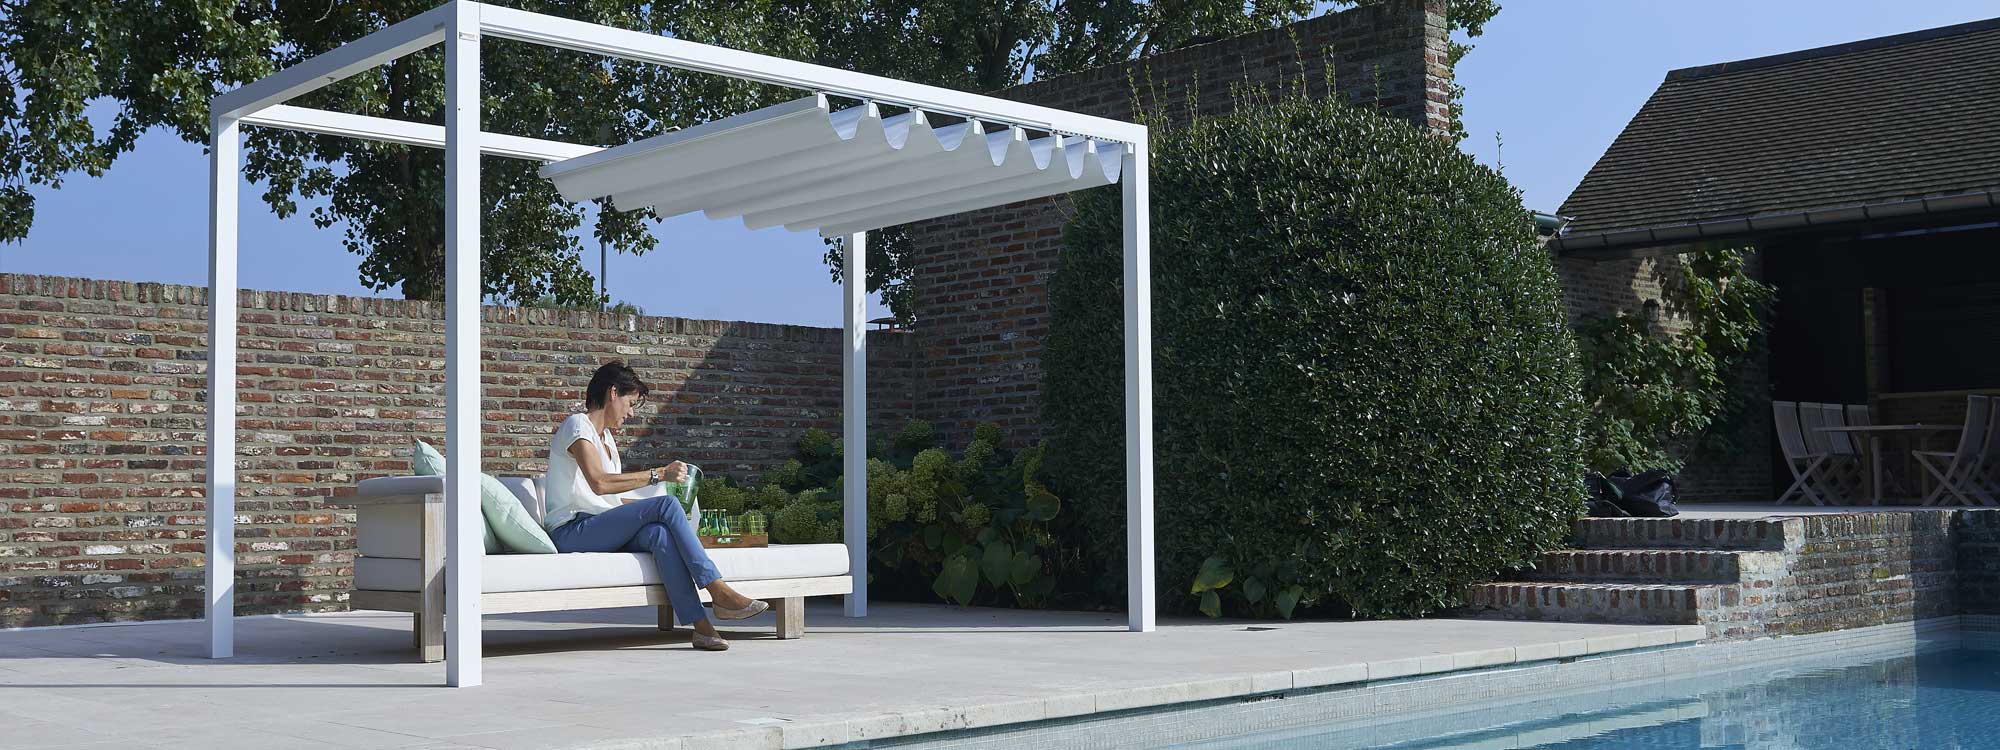 Cabana garden shade is a simple garden pergola & chic outdoor canopy in high quality sun shade materials by Prostor parasol company, Belgium.